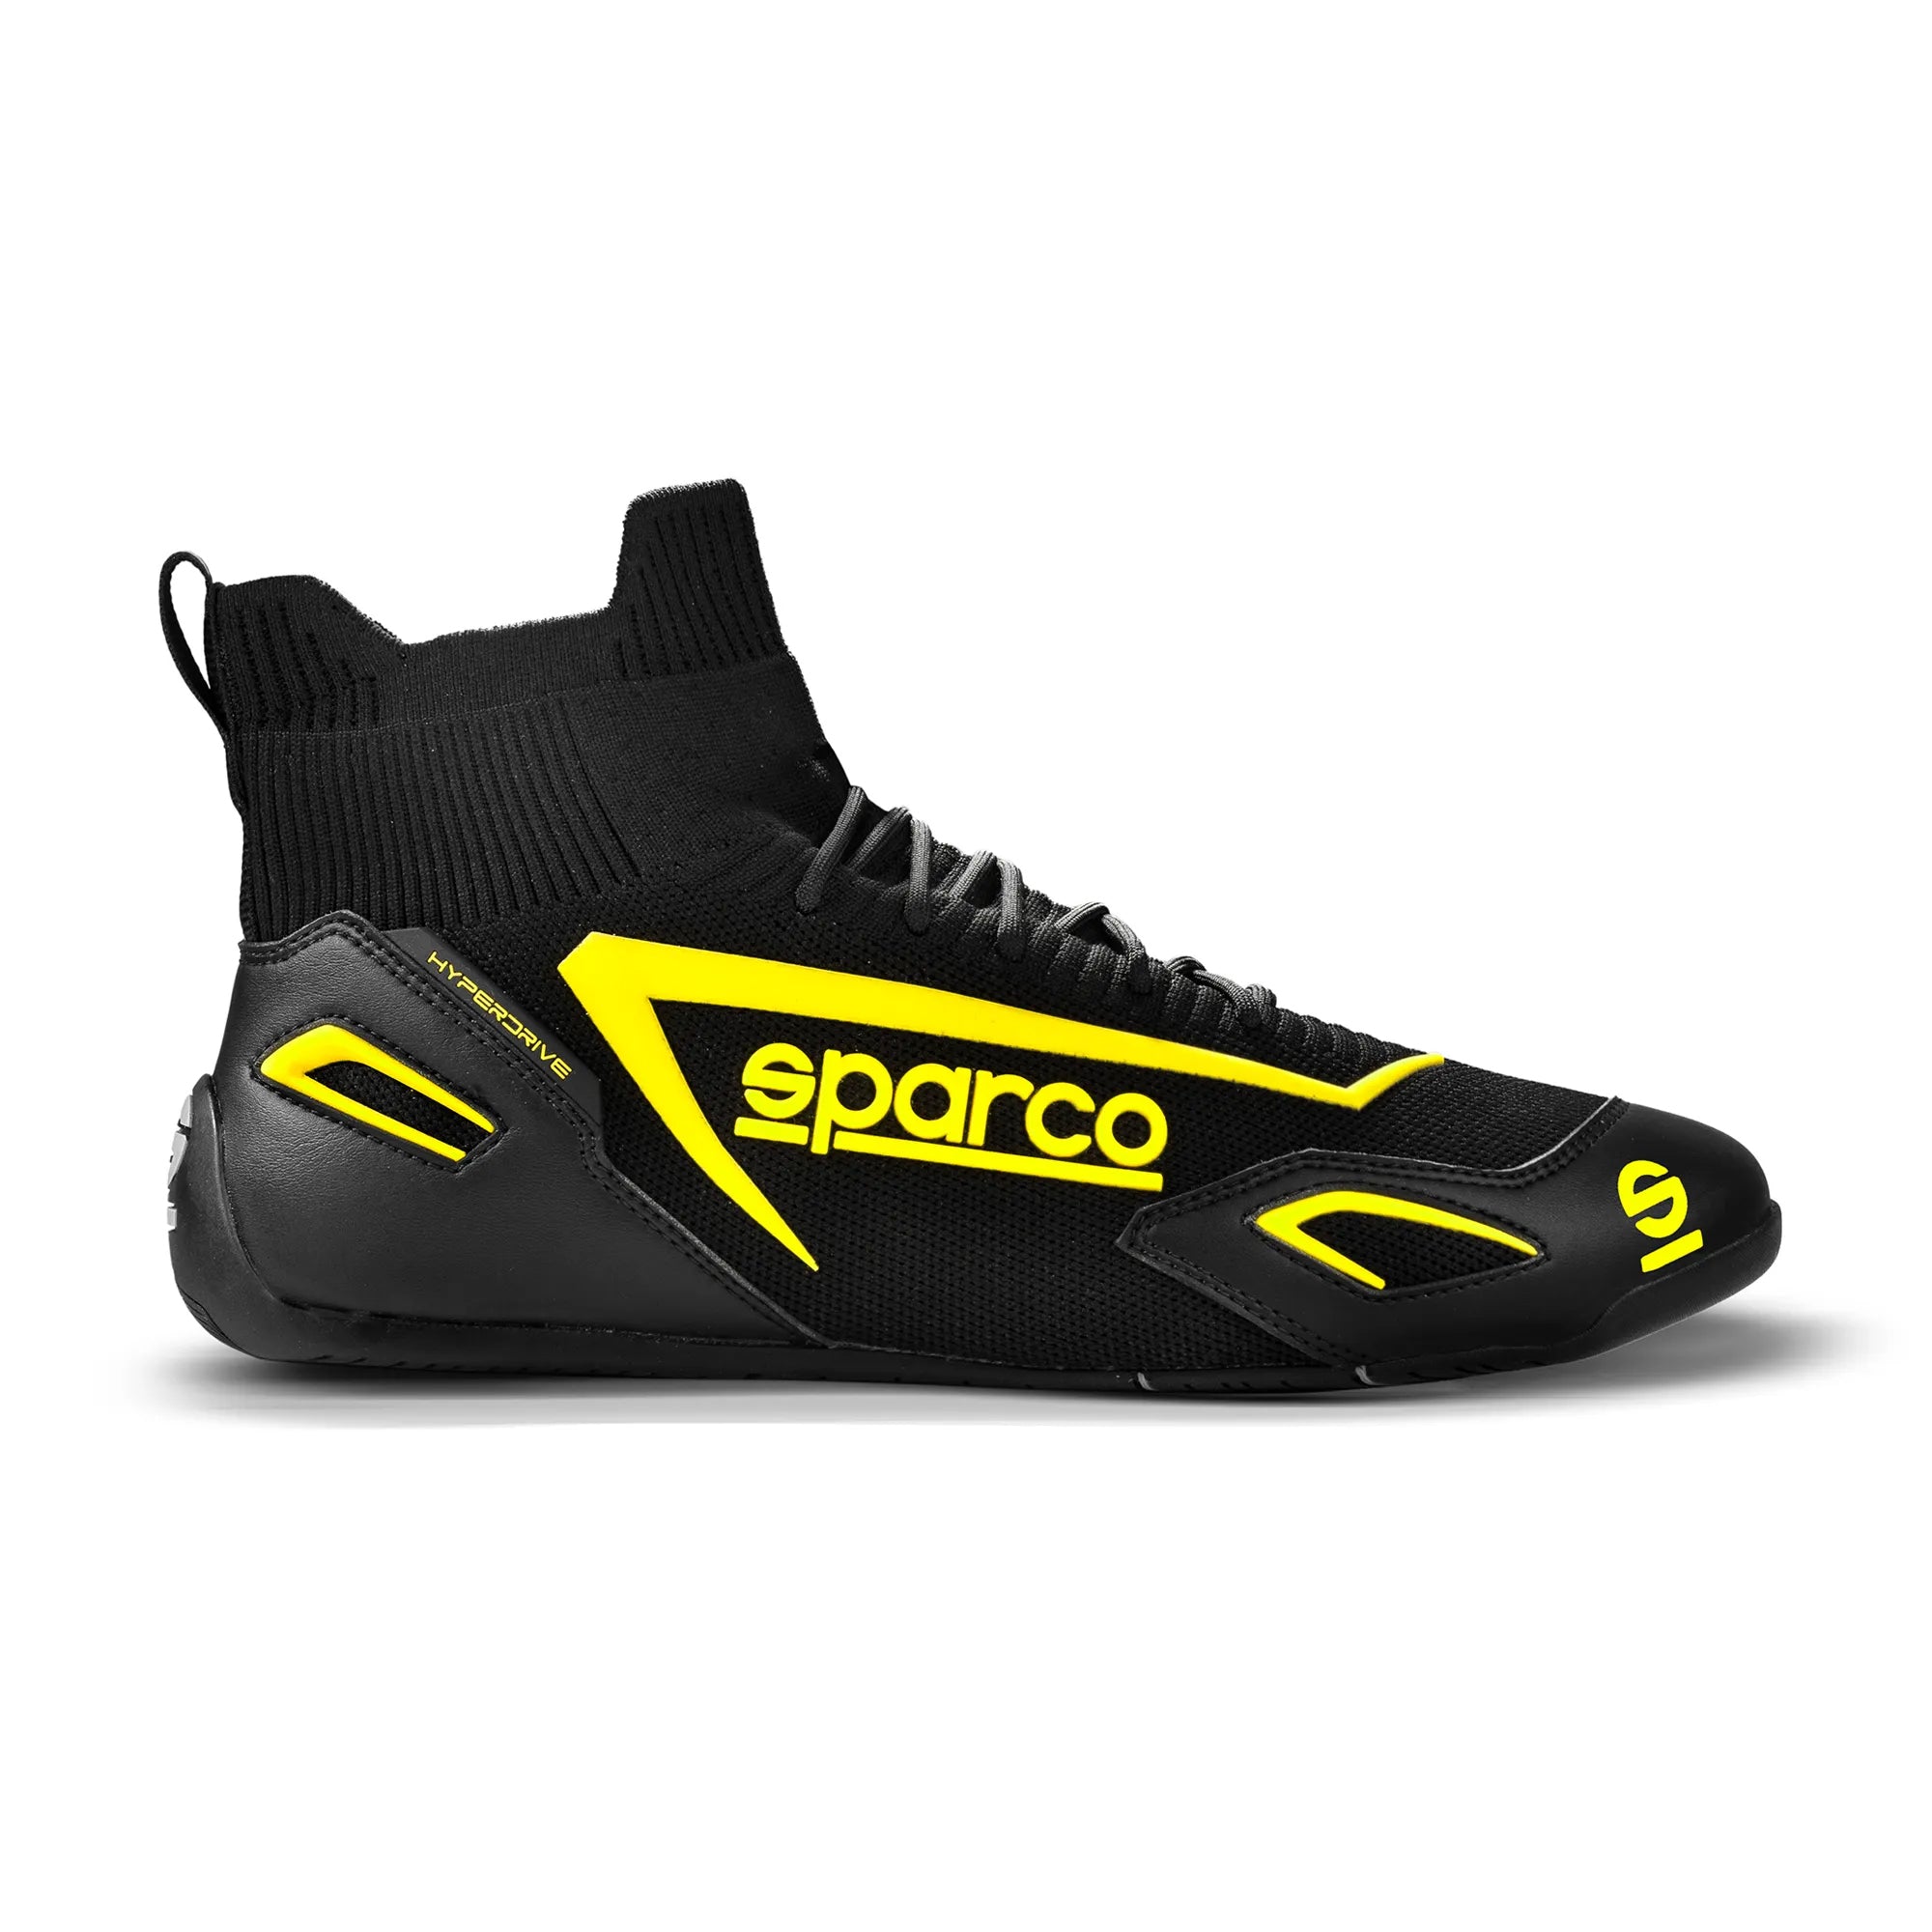 SPARCO 00129343NRGF Gaming sim racing shoes HYPERDRIVE, black/yellow, size 43 Photo-0 